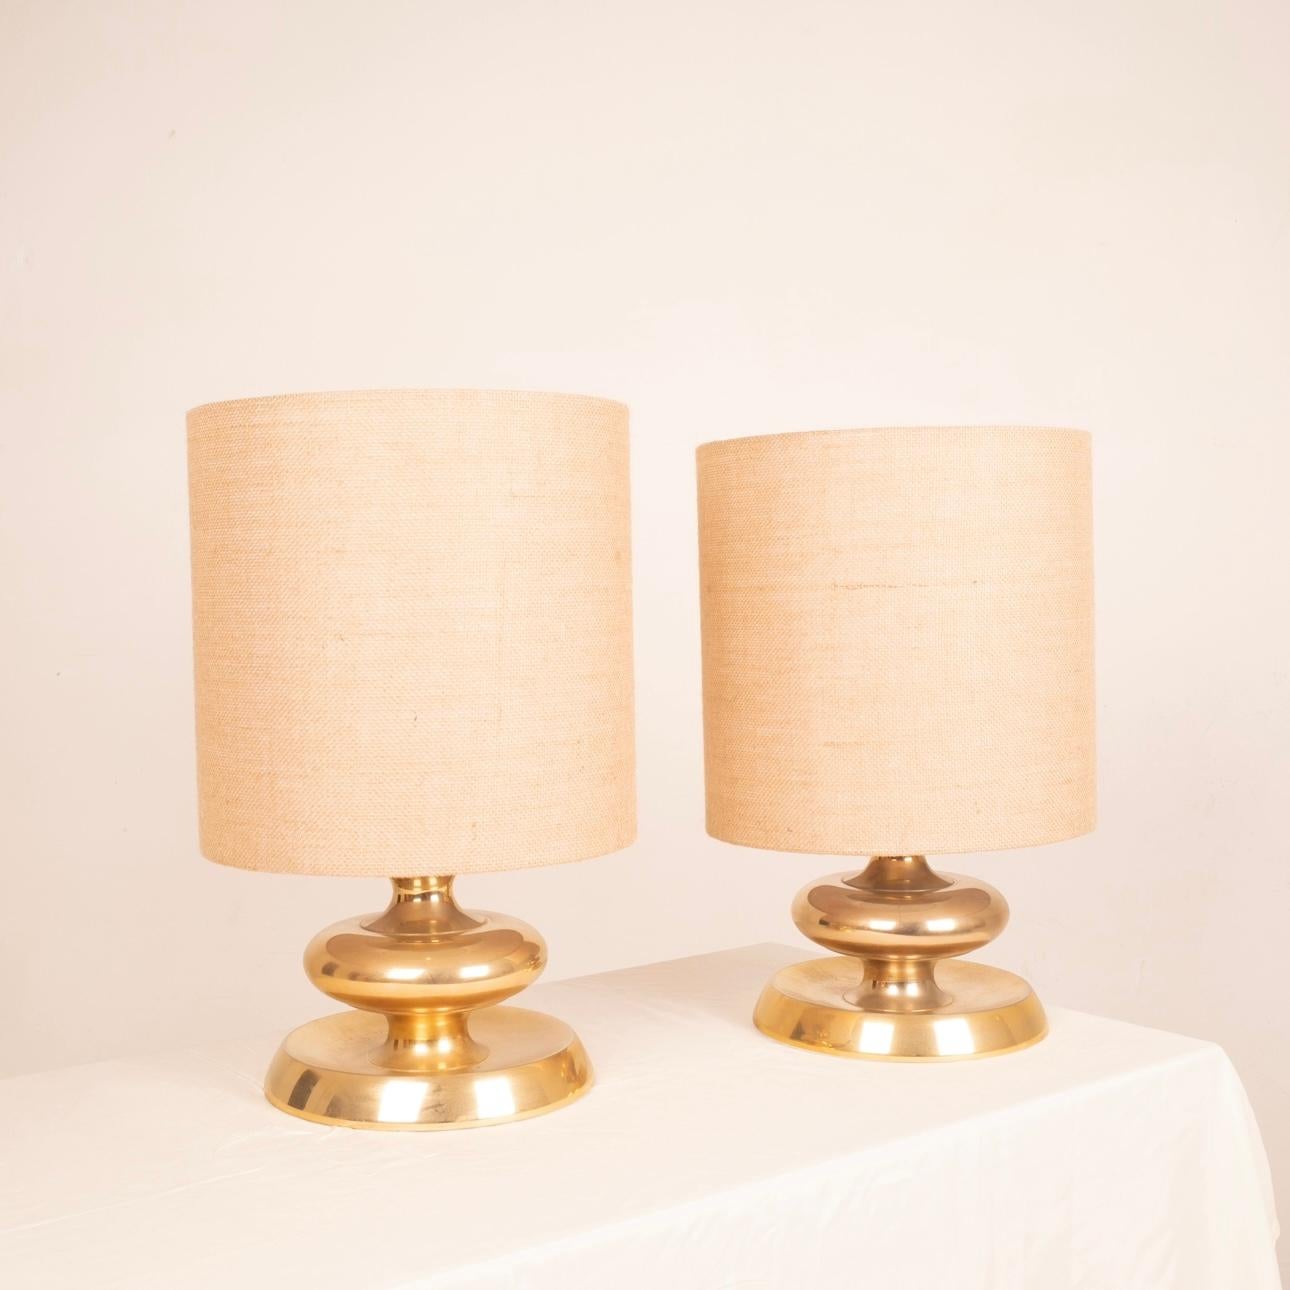 Extraordinary and very rare pair of lamps model C-363 in the most precious version, bathed in 24k gold, and produced by the well-known company Luci Italia in the late 60s and early 70s.
The lamps are in excellent original condition as pictured, with